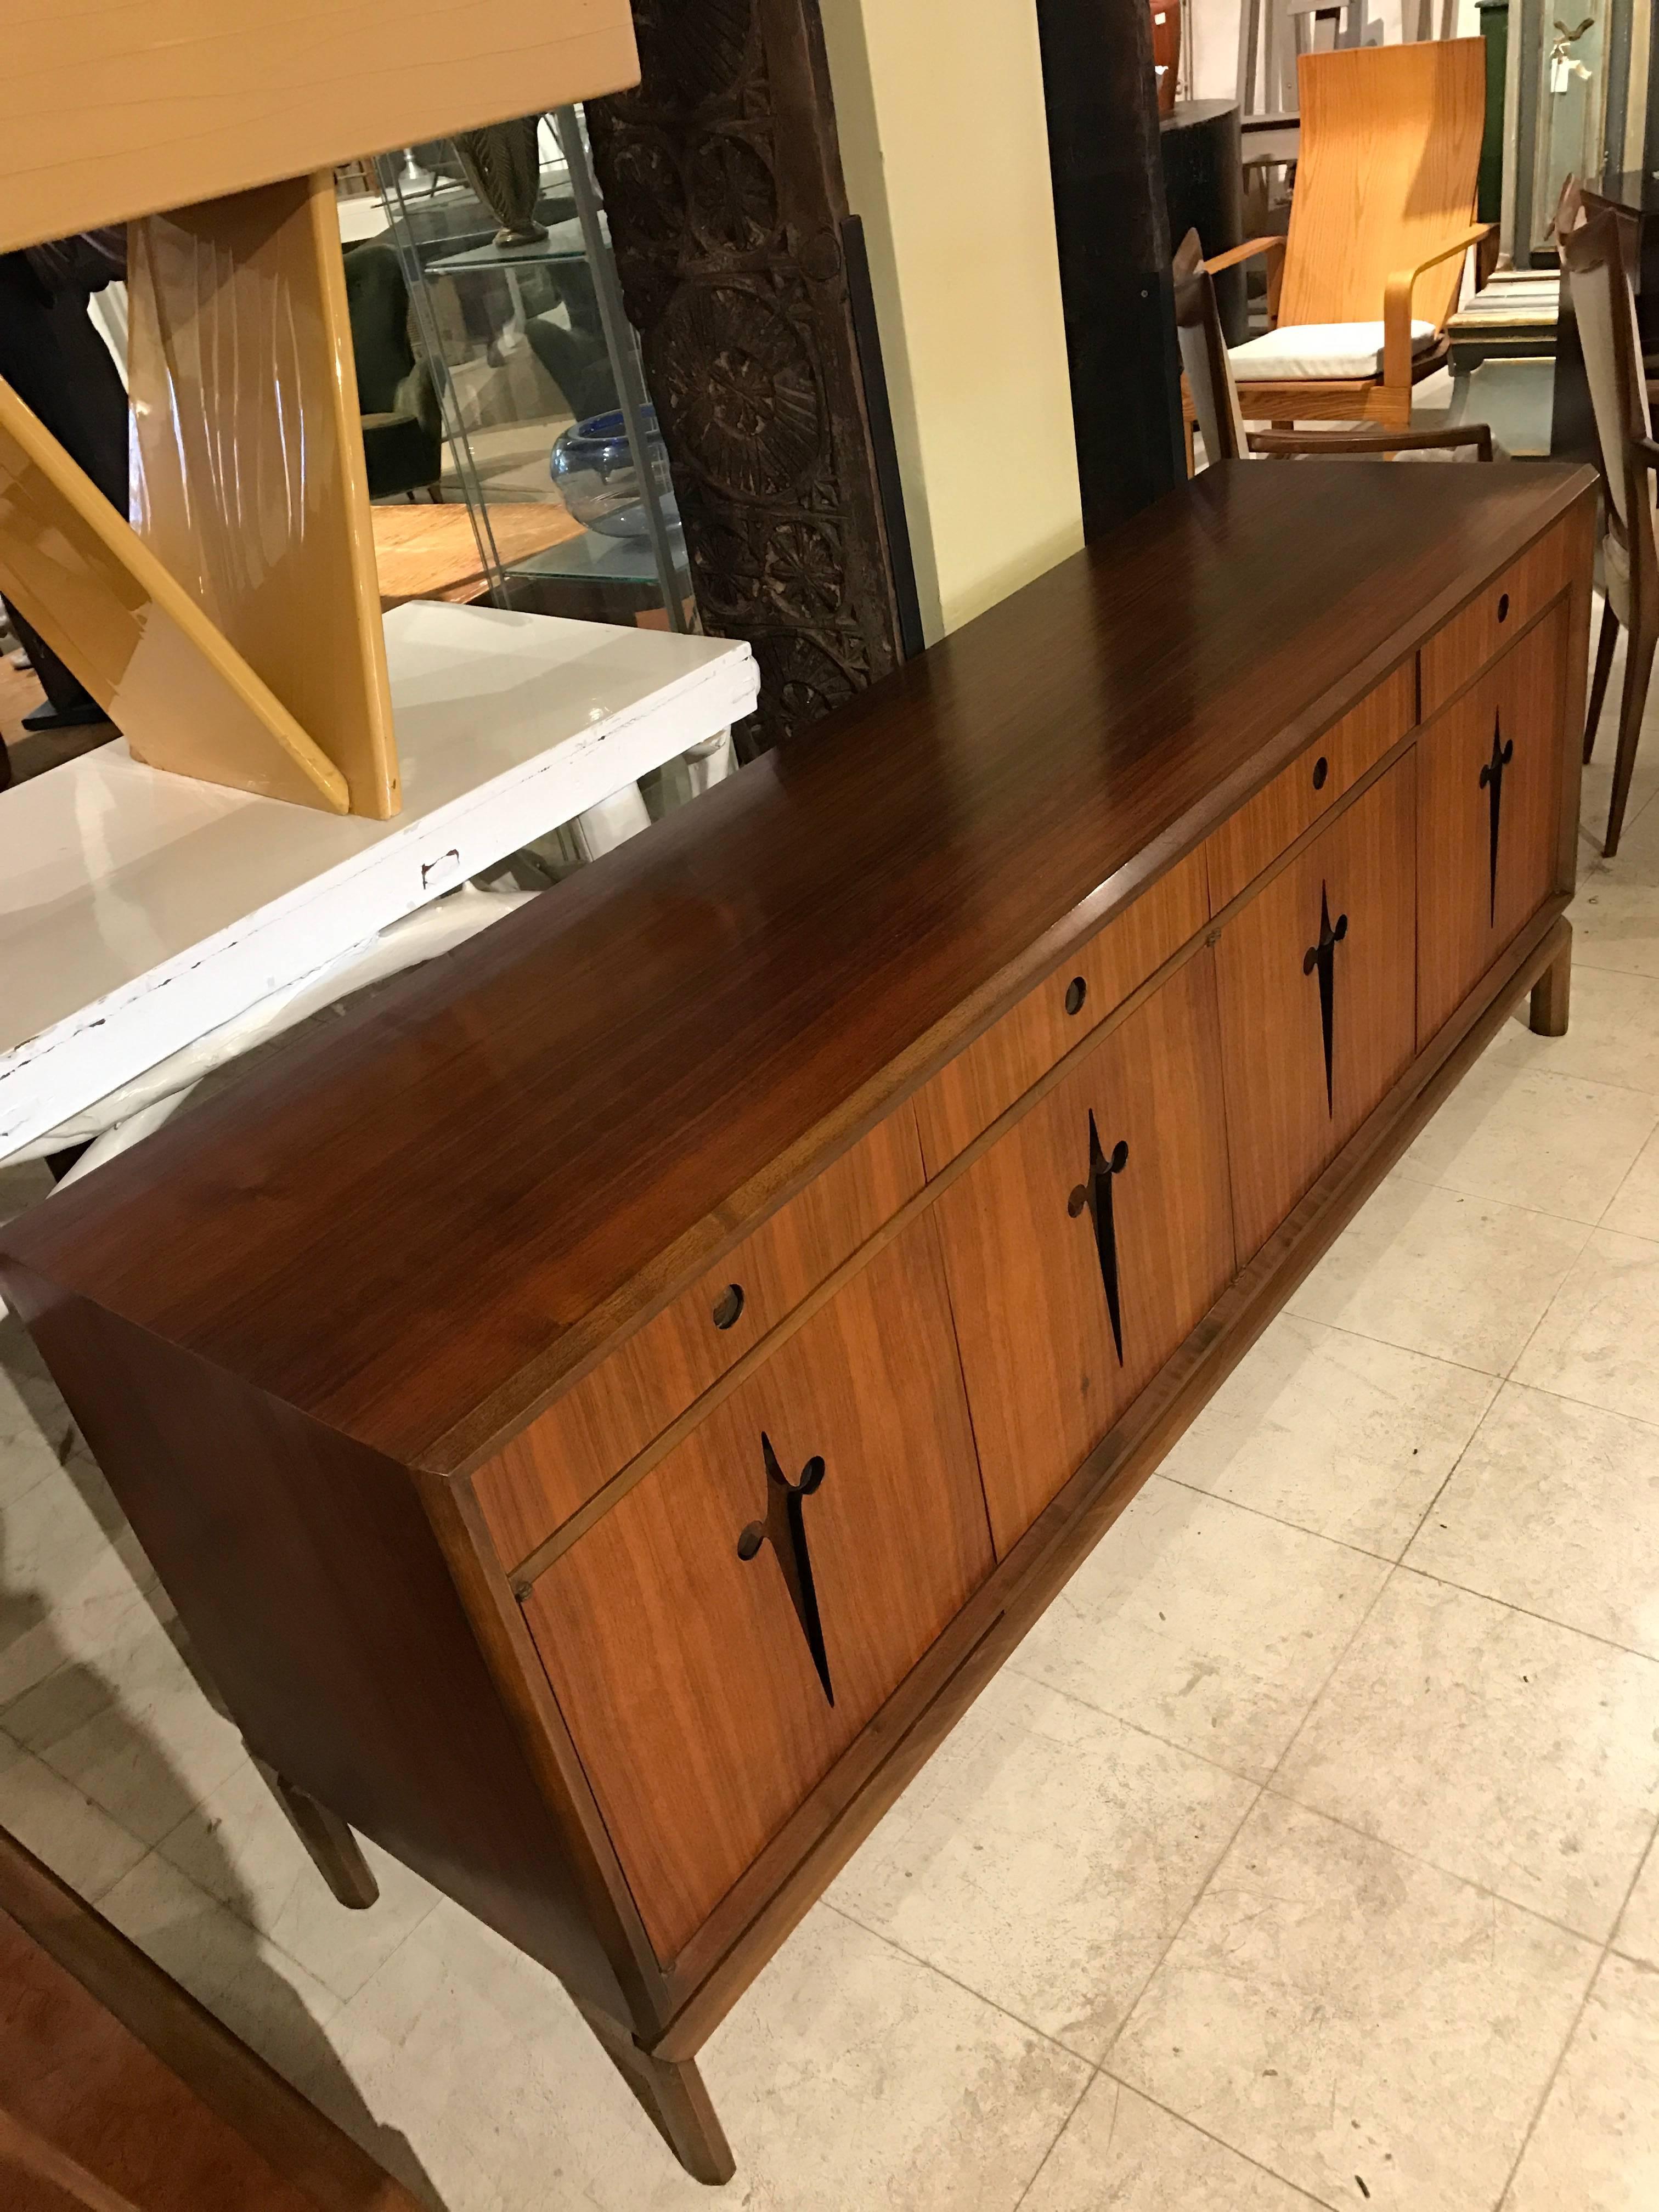 Gorgeous walnut sideboard appears to be 